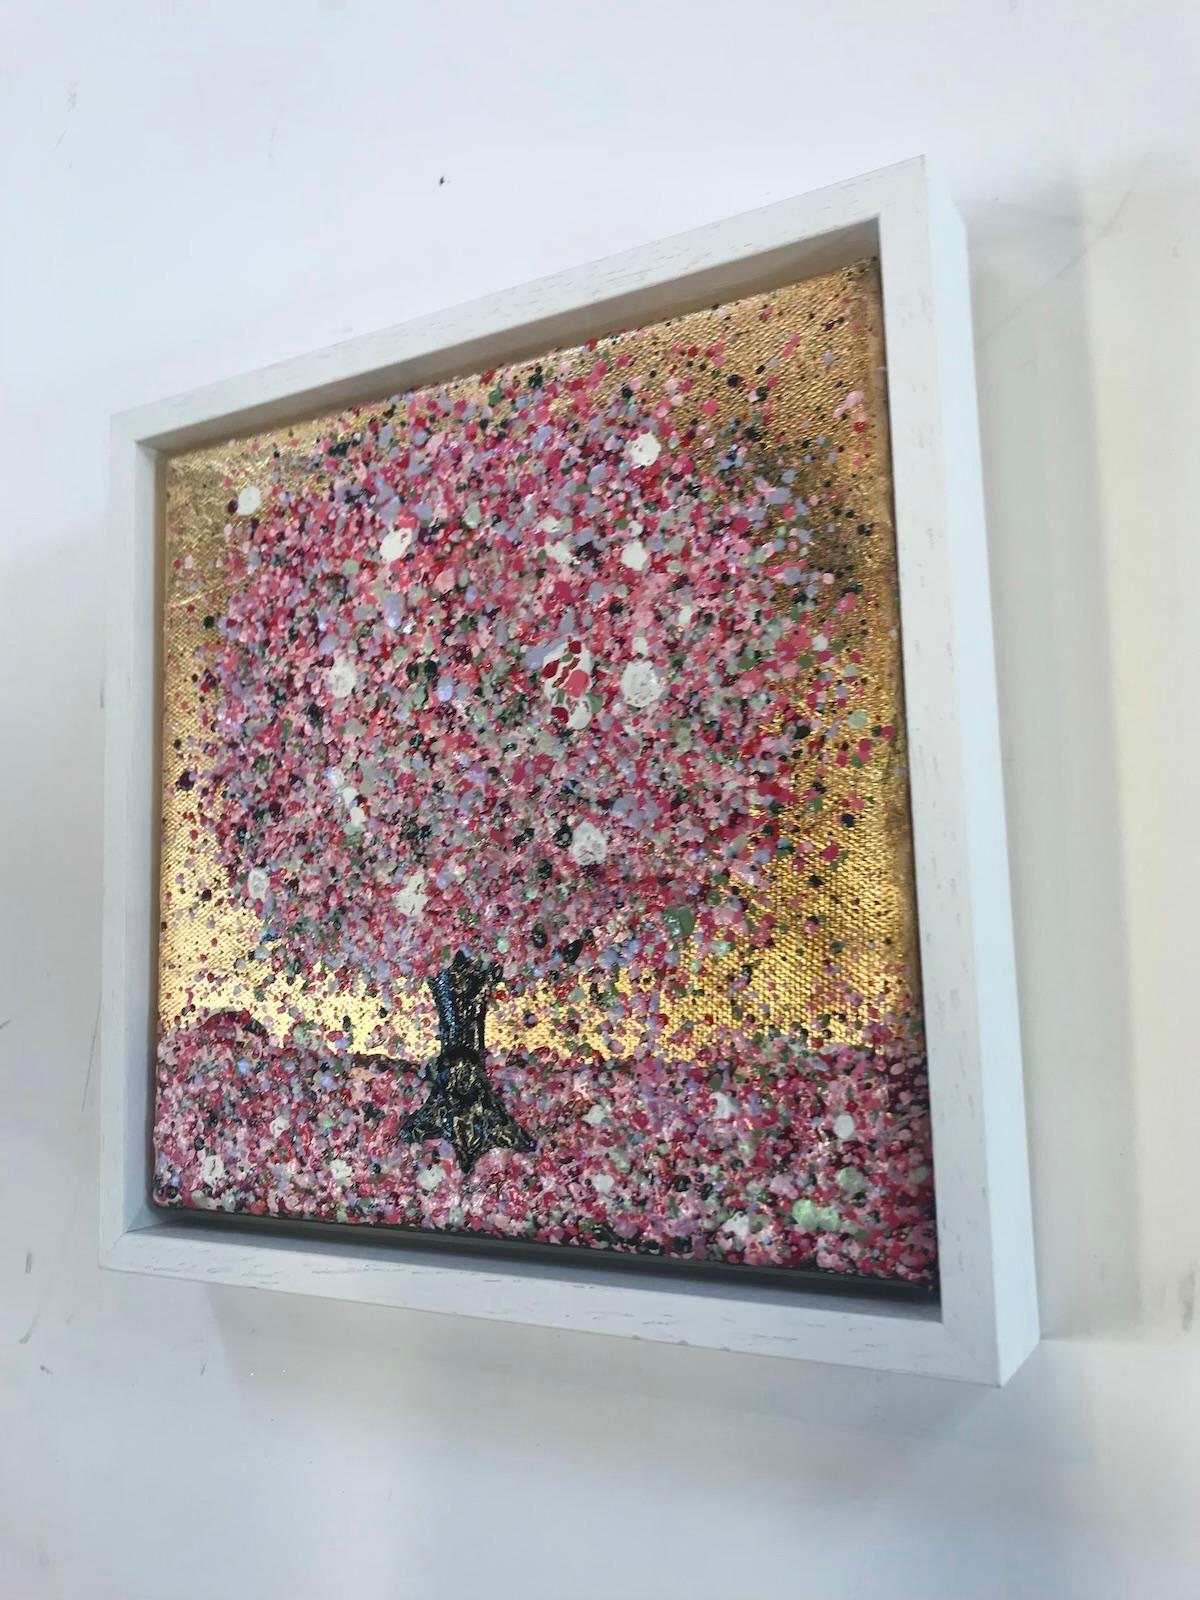 A Little Spring Joy by Nicky Chubb [2022]
original and hand signed by the artist 
Acrylic on Canvas
Image size: H:20 cm x W:20 cm
Complete Size of Unframed Work: H:20 cm x W:20 cm x D:2.5cm
Frame Size: H:23 cm x W:23 cm x D:3.5cm
Sold Framed
Please